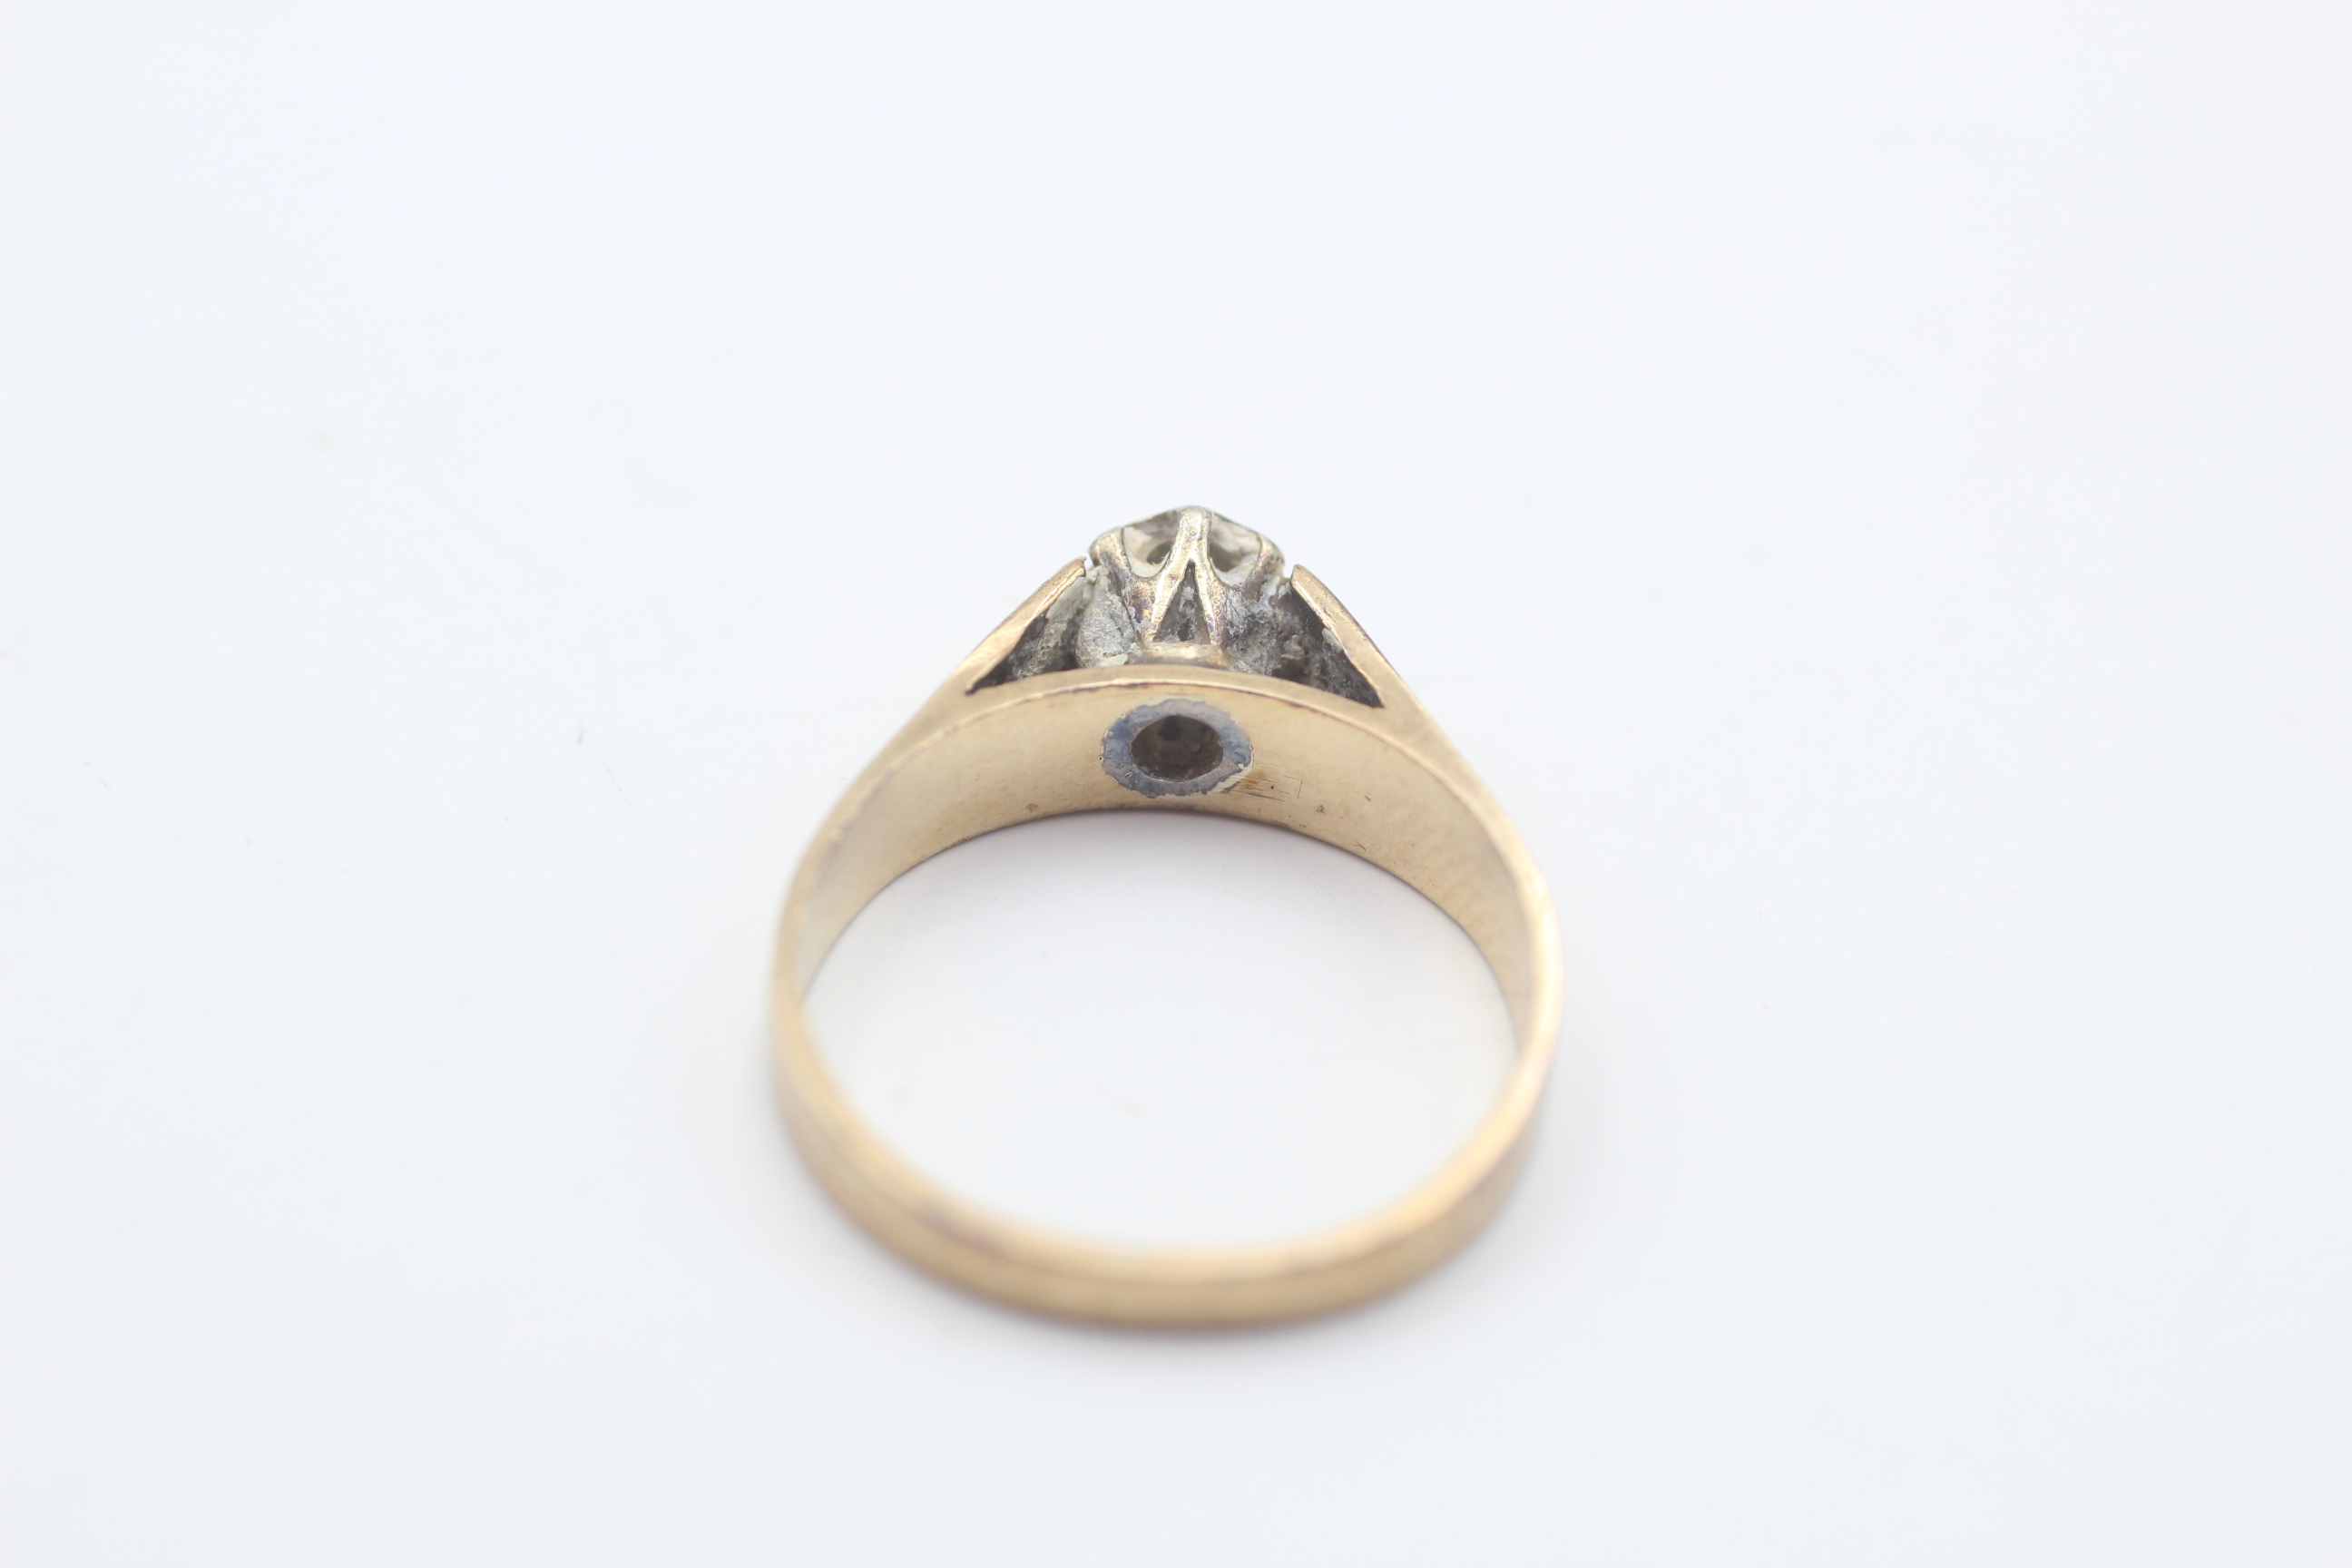 9ct gold vintage diamond solitaire etched cathedral setting ring (2.3g) - Image 5 of 5